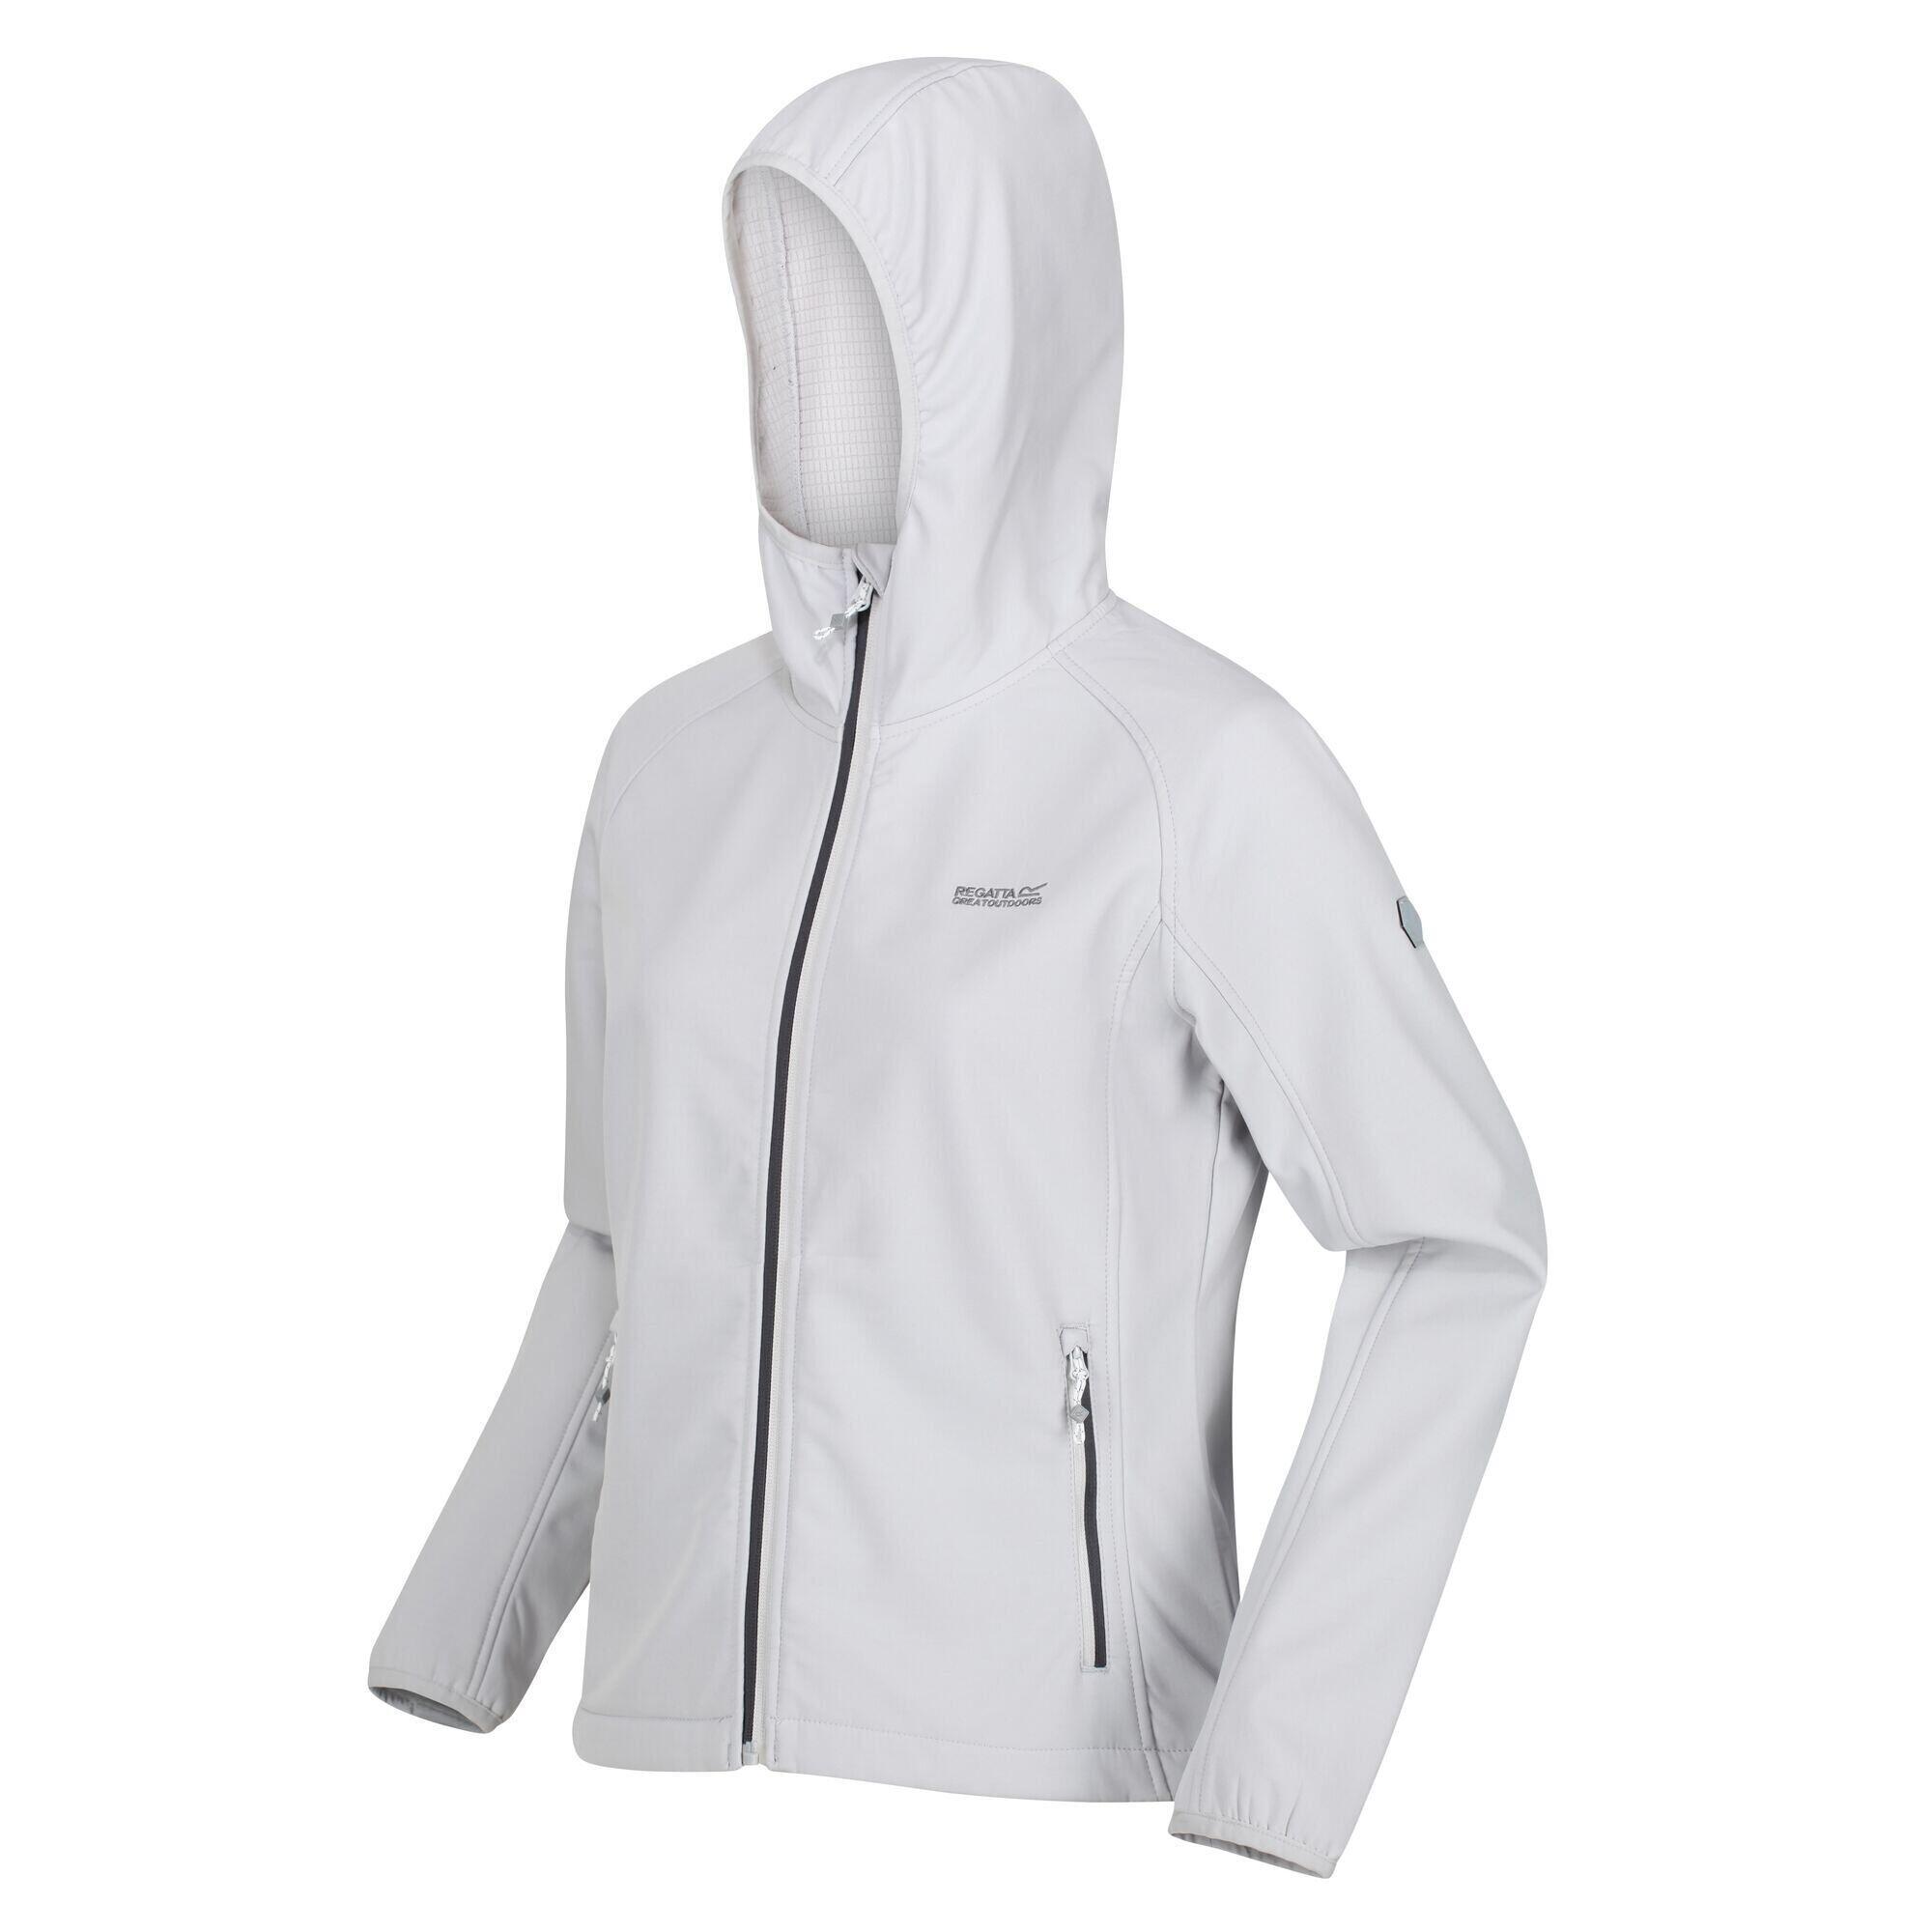 Womens/Ladies Ared III Soft Shell Jacket (Cyberspace) 4/5